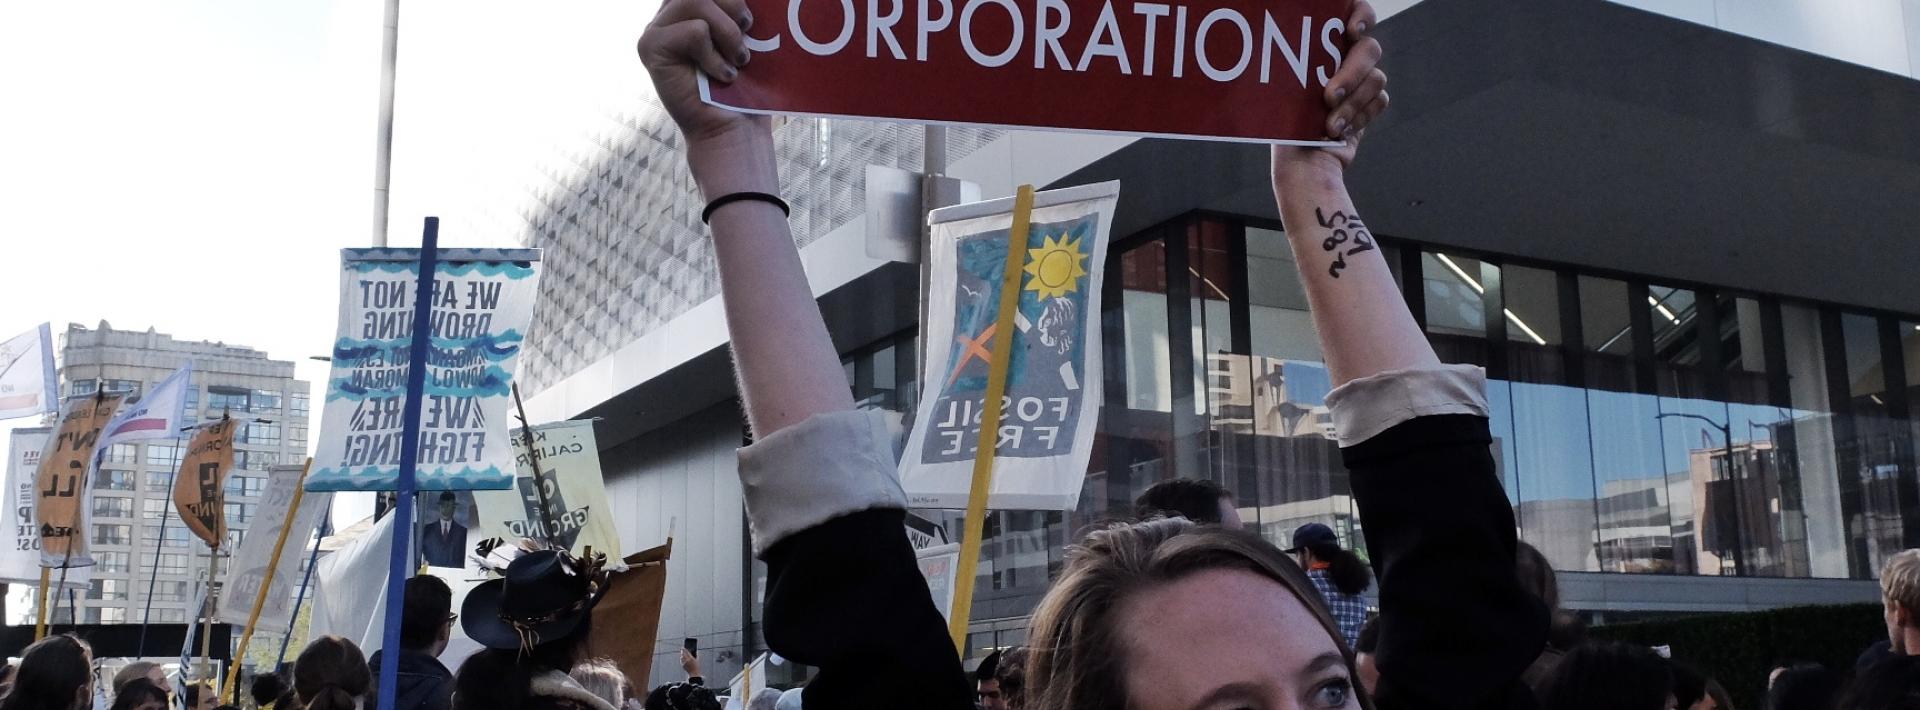 Stop fossil fuel extraction, activists cry at San Francisco climate summit